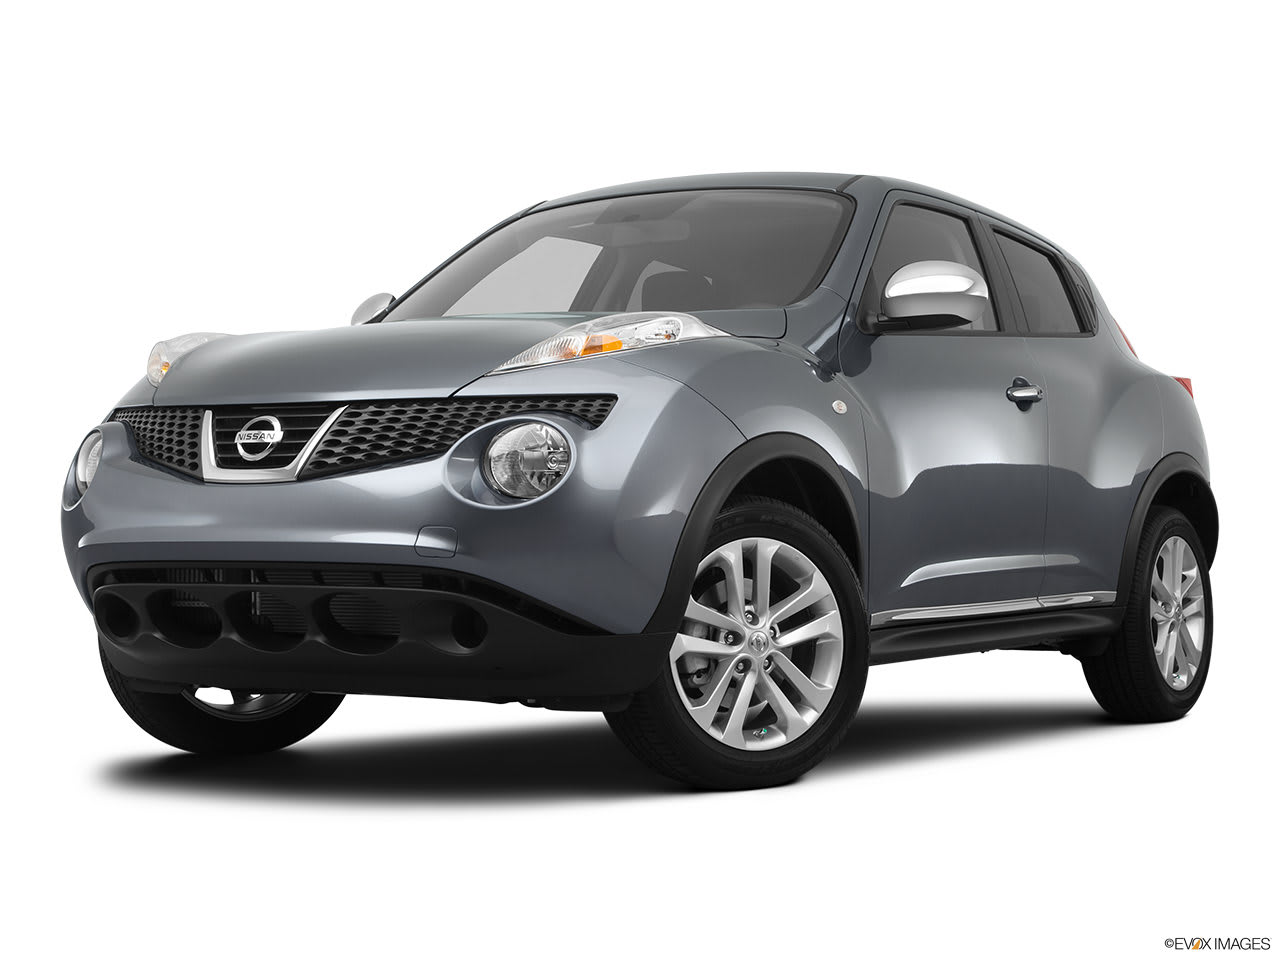 A Buyer's Guide to the 2012 Nissan Juke